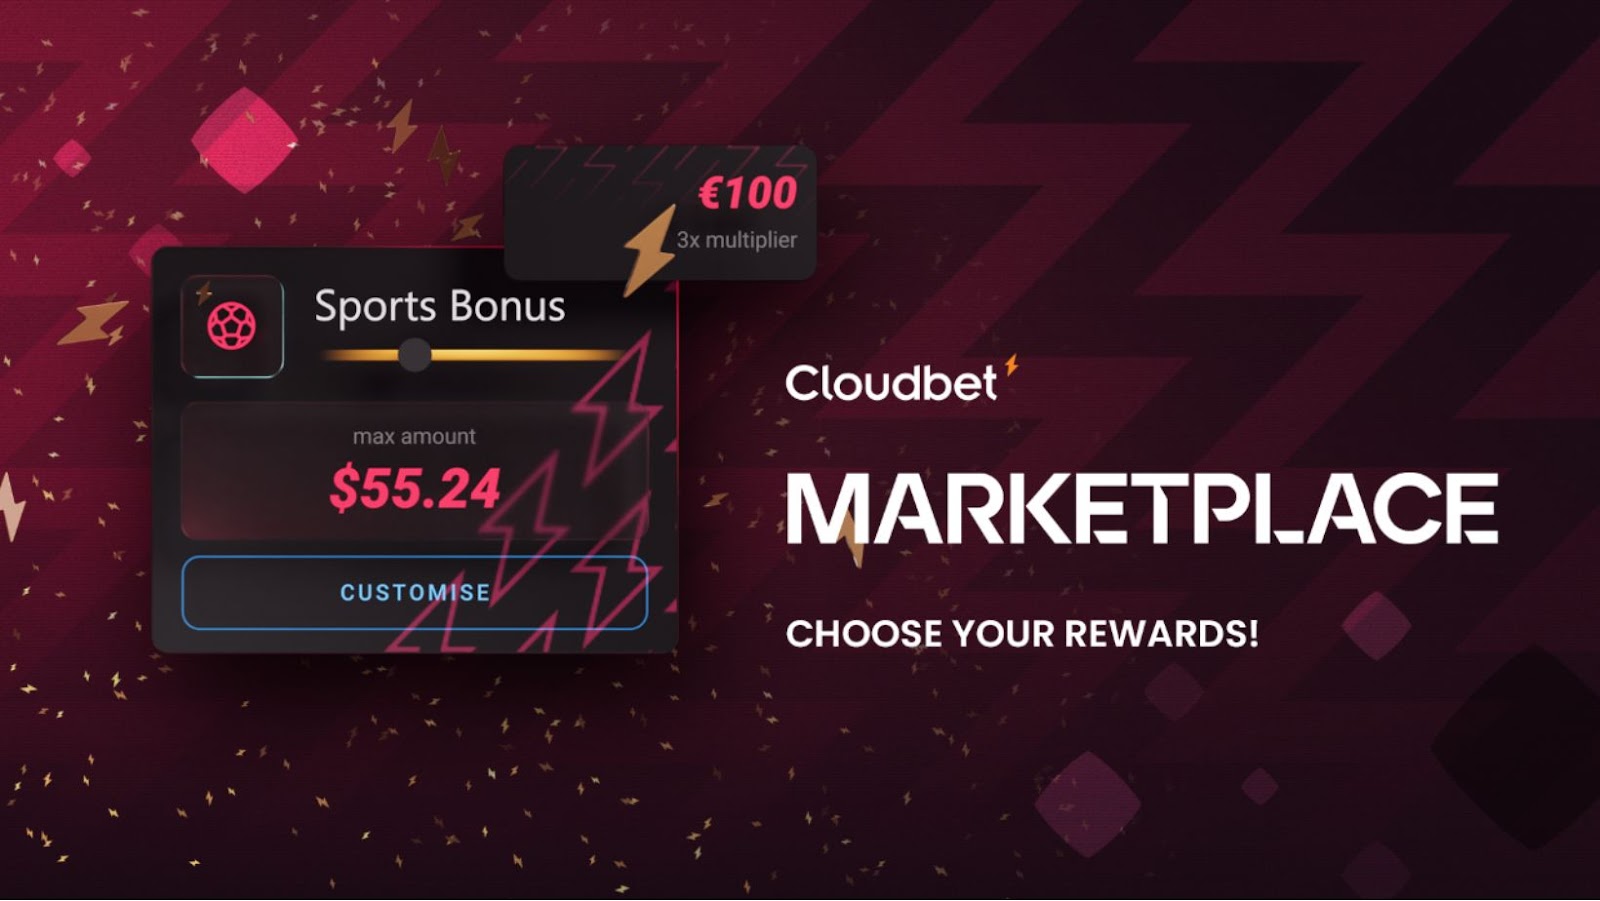 Why Cloudbet’s Marketplace Program is More Than Just a Headline